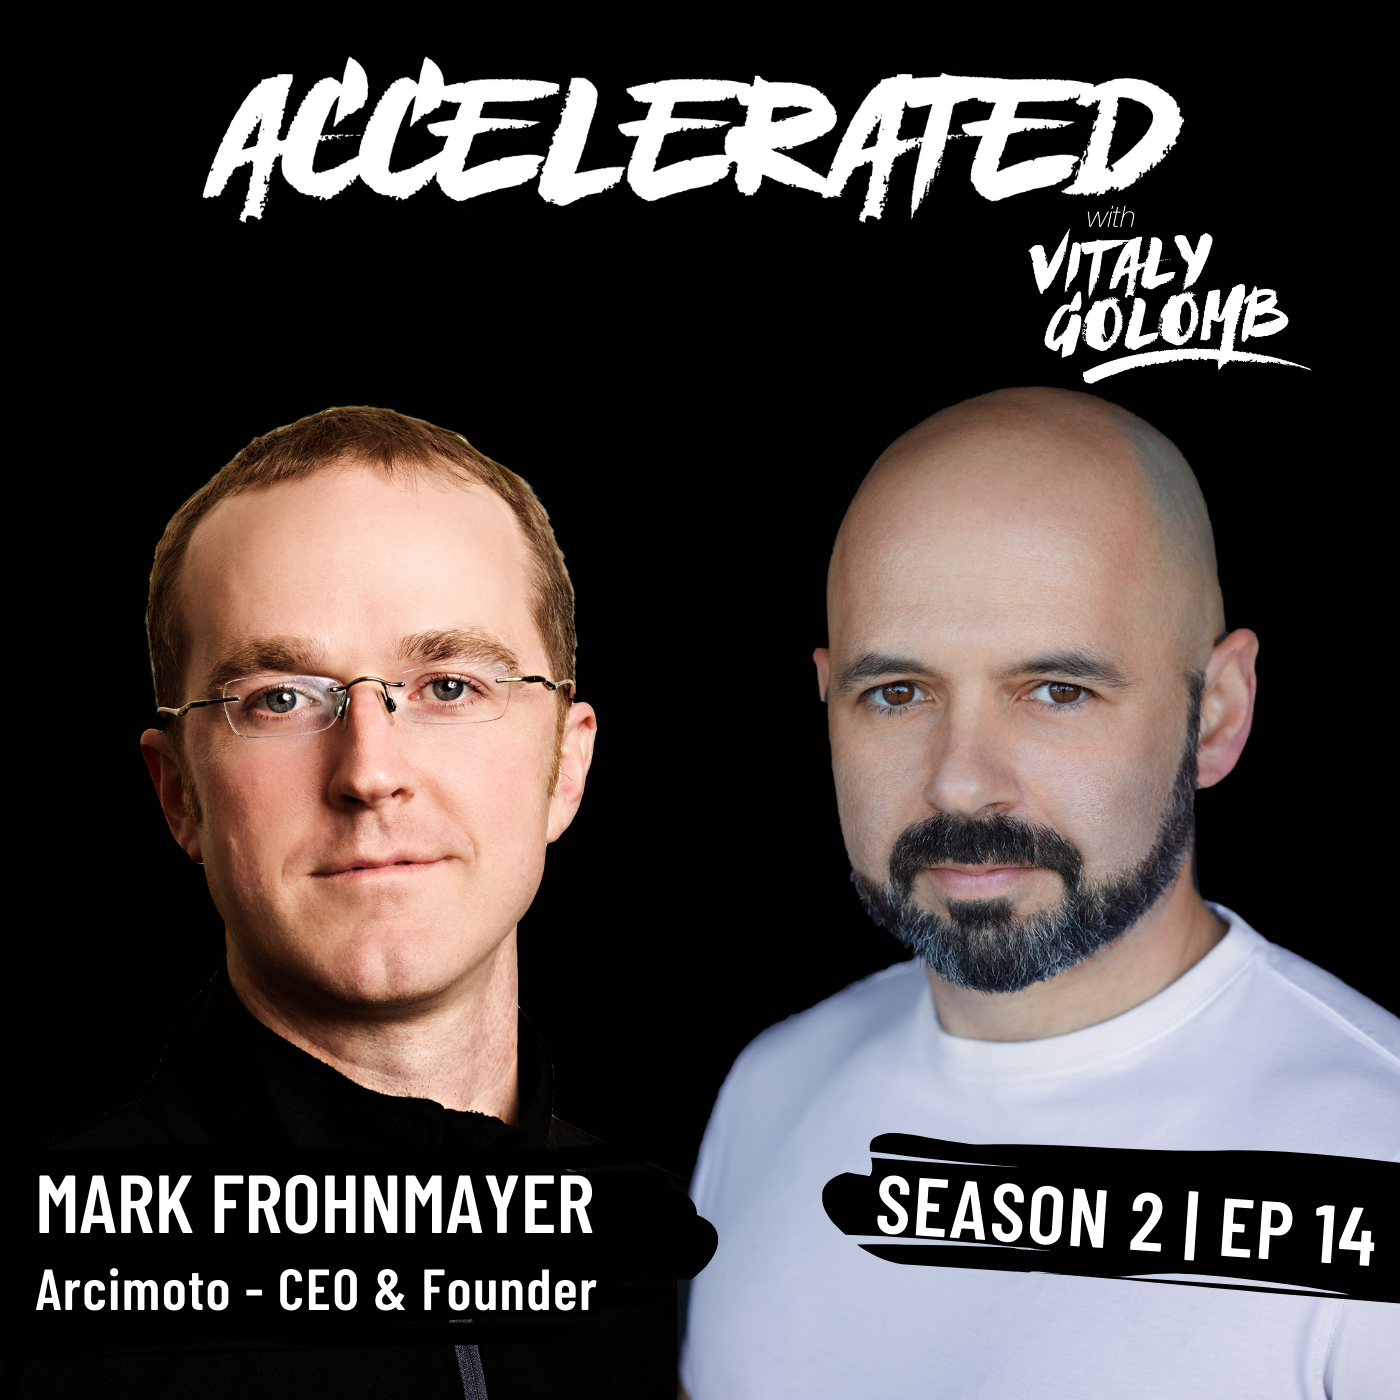 Artwork for podcast Accelerated with Vitaly Golomb